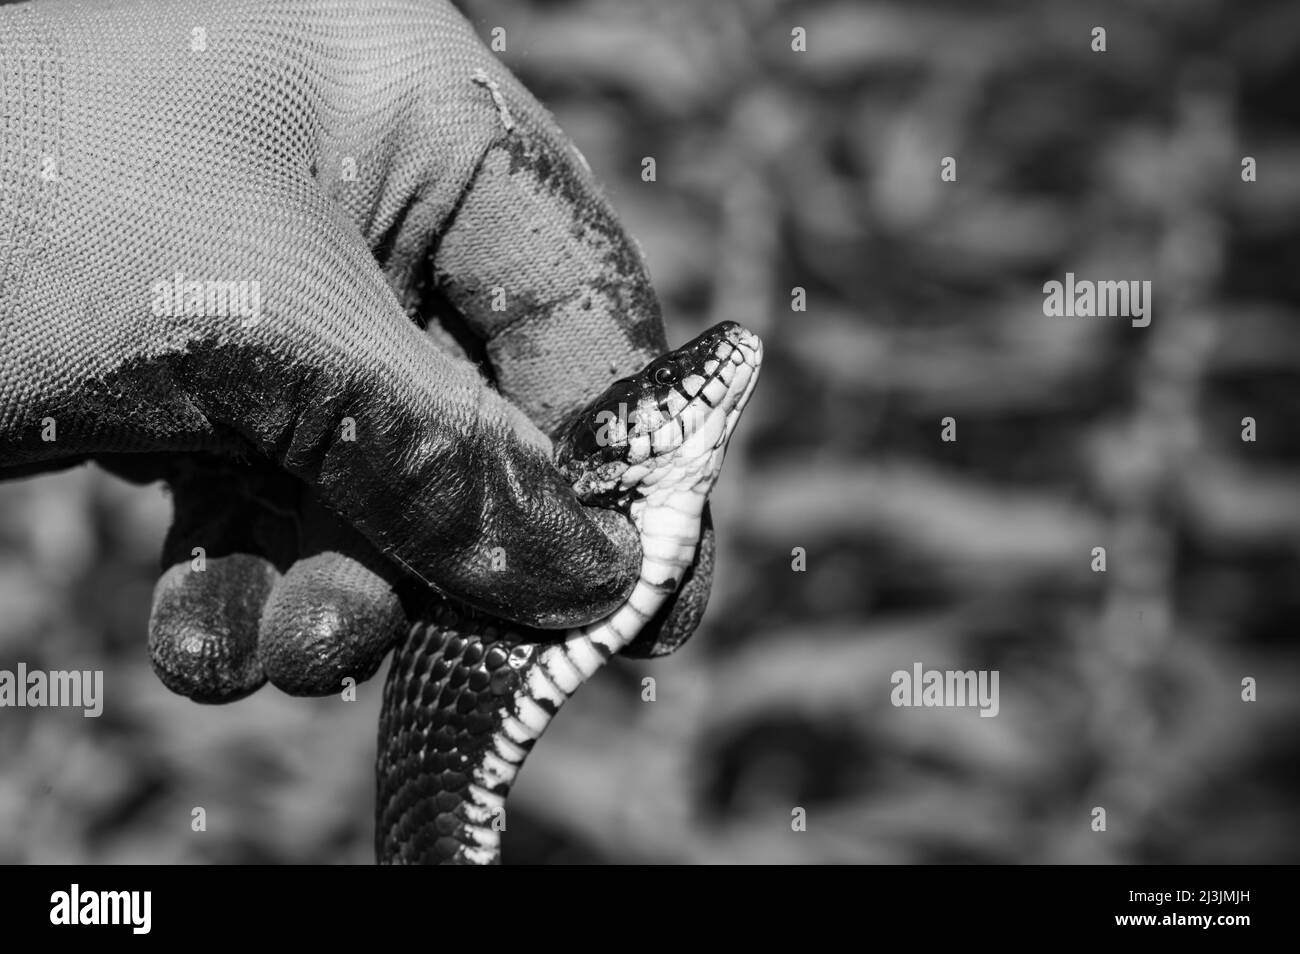 Snake in human hands, Natrix is a genus of non-venomous snakes of the snake family, non-venomous snake. Stock Photo